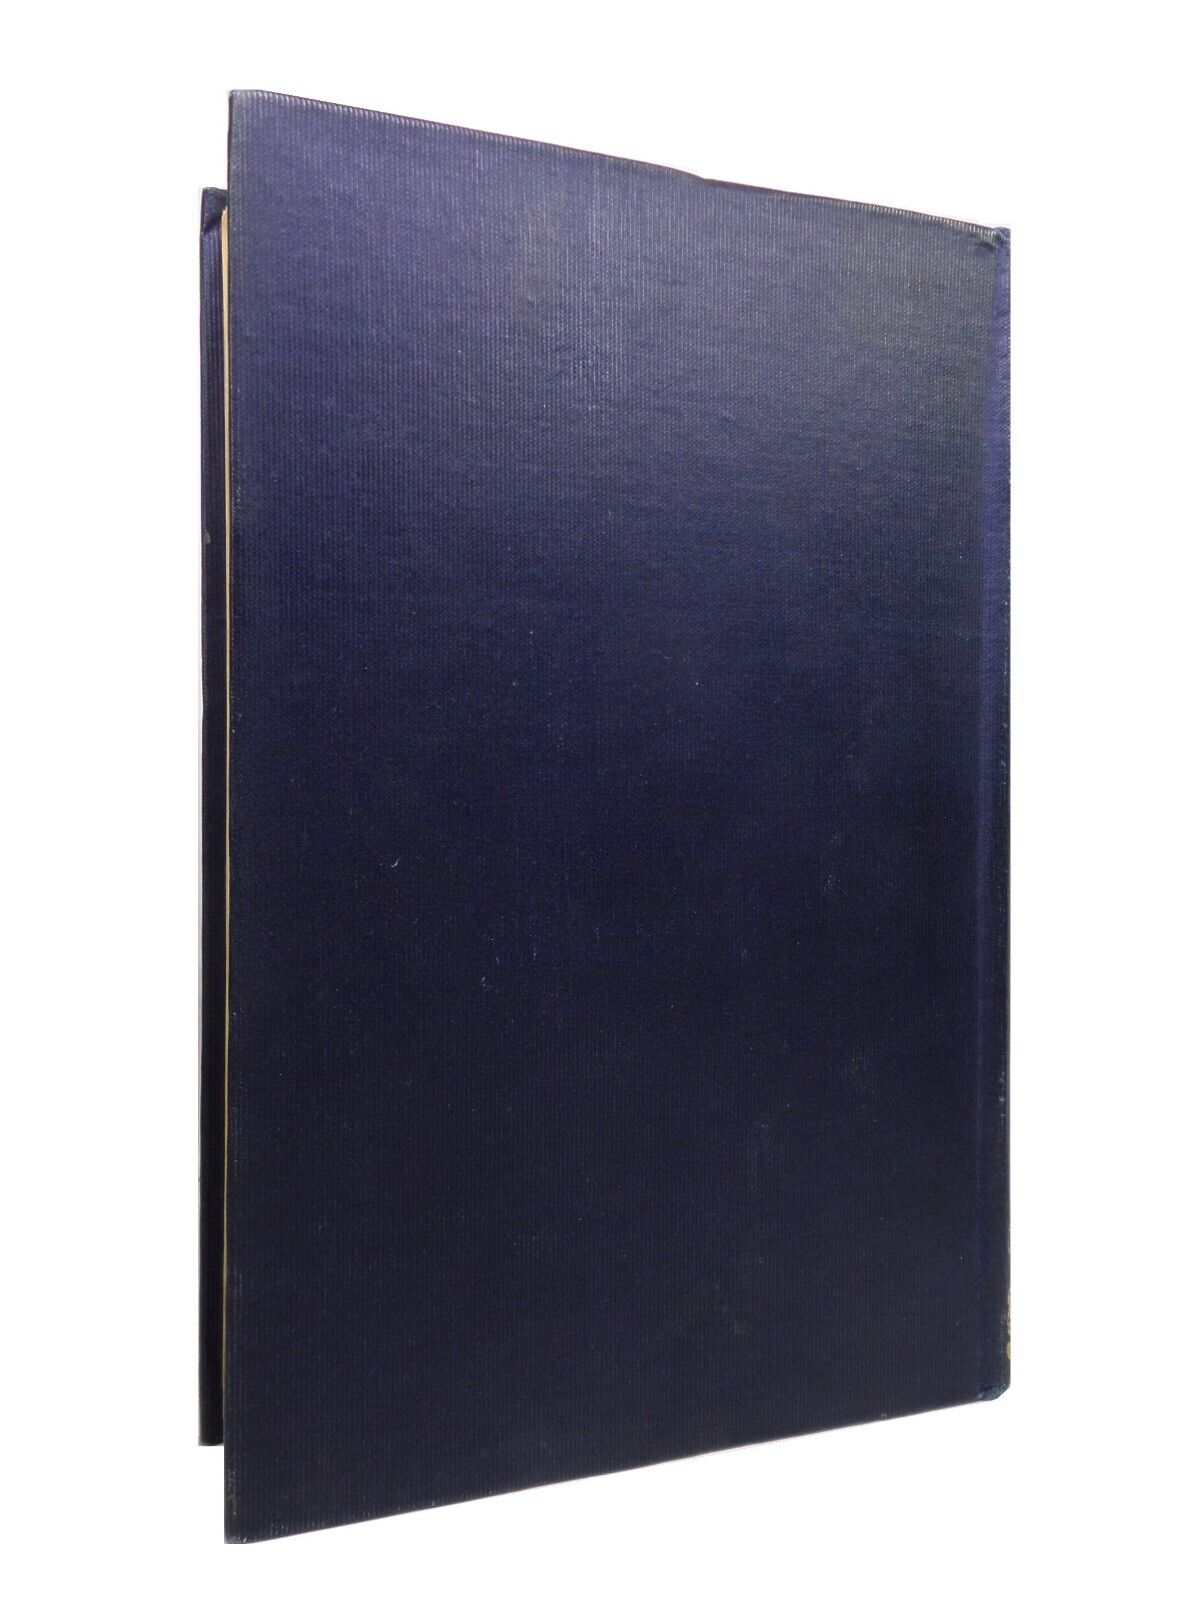 THE £1,000,000 BANK-NOTE AND OTHER NEW STORIES 1893 MARK TWAIN FIRST UK EDITION